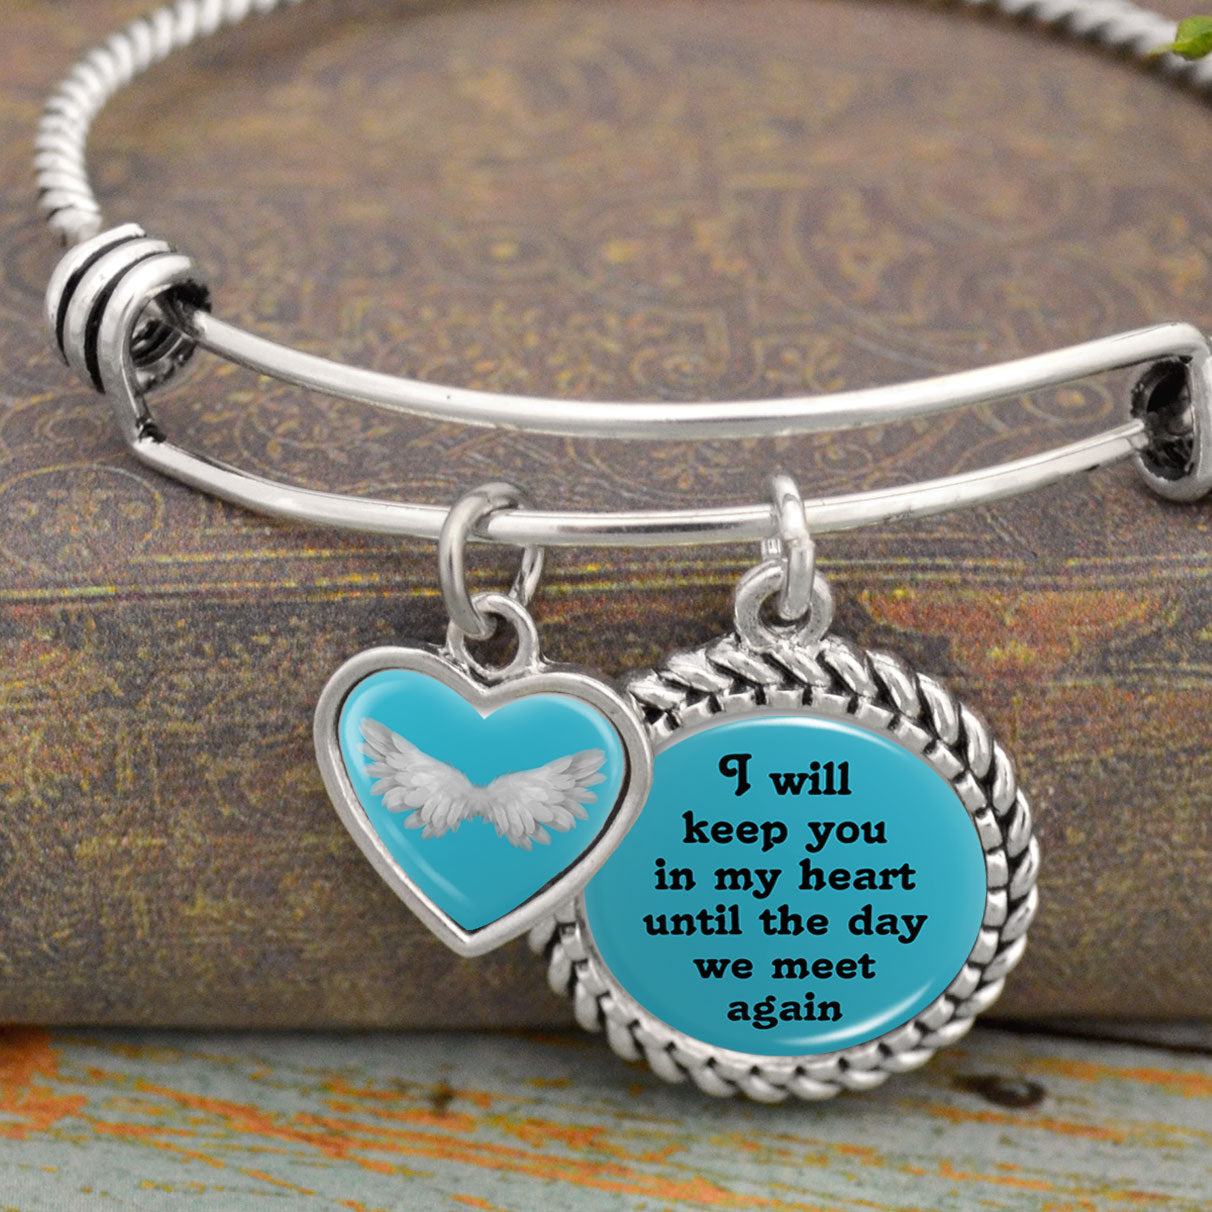 I Will Keep You In My Heart Until The Day We Meet Again Charm Bracelet